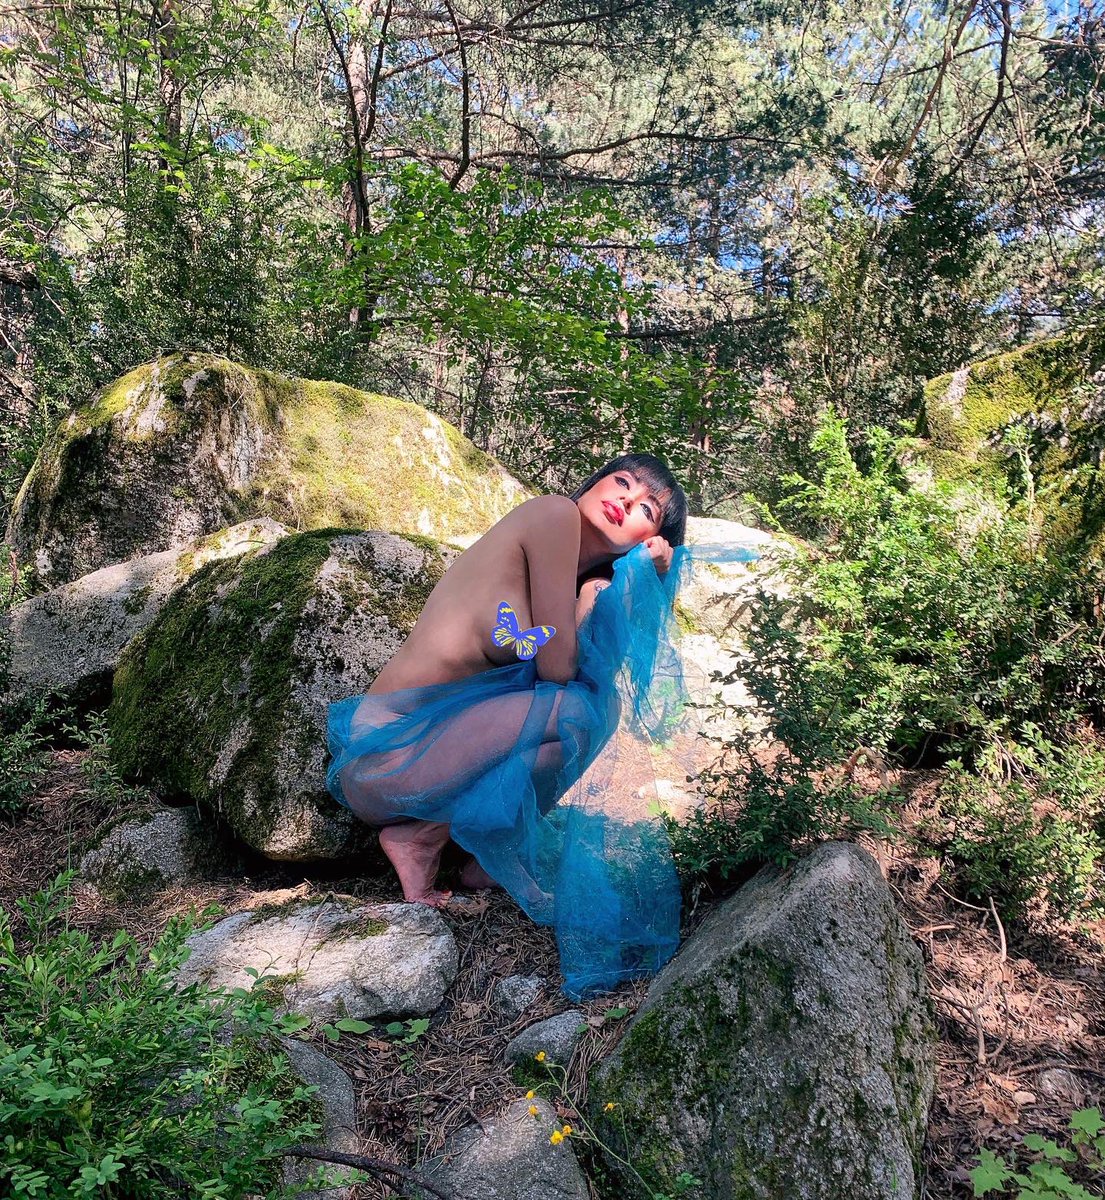 Silvia on the Rocks 💎

It's easy to create in the middle of nature when you feel connected with it..
Naked is my soul as nature always is…
#nakedsoul #travelingmodel #Andorra  #internationalmodel #artnudemodel #nature #outdoorshoot